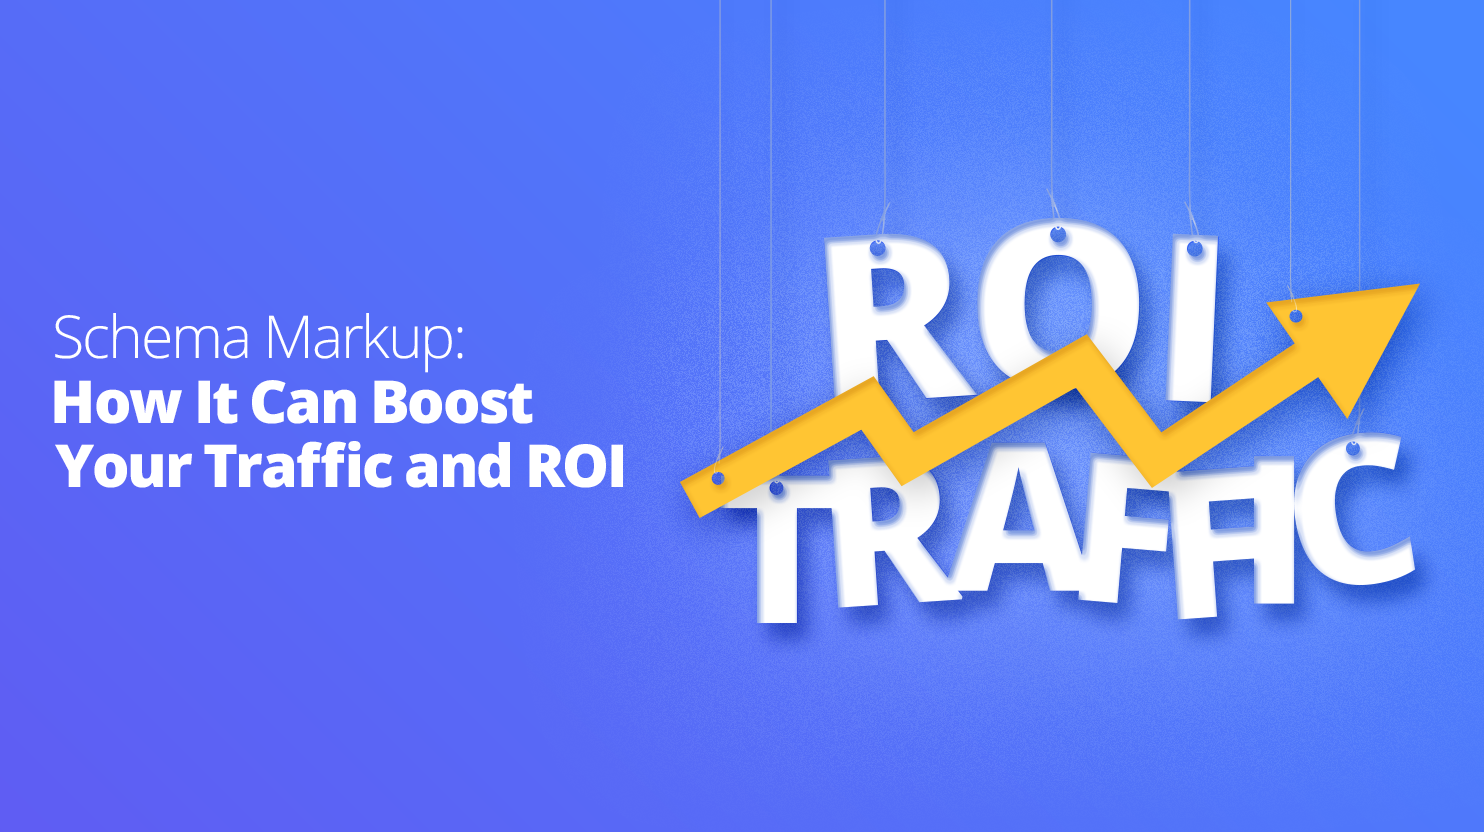 Schema Markup: How It Can Boost Your Traffic and ROI